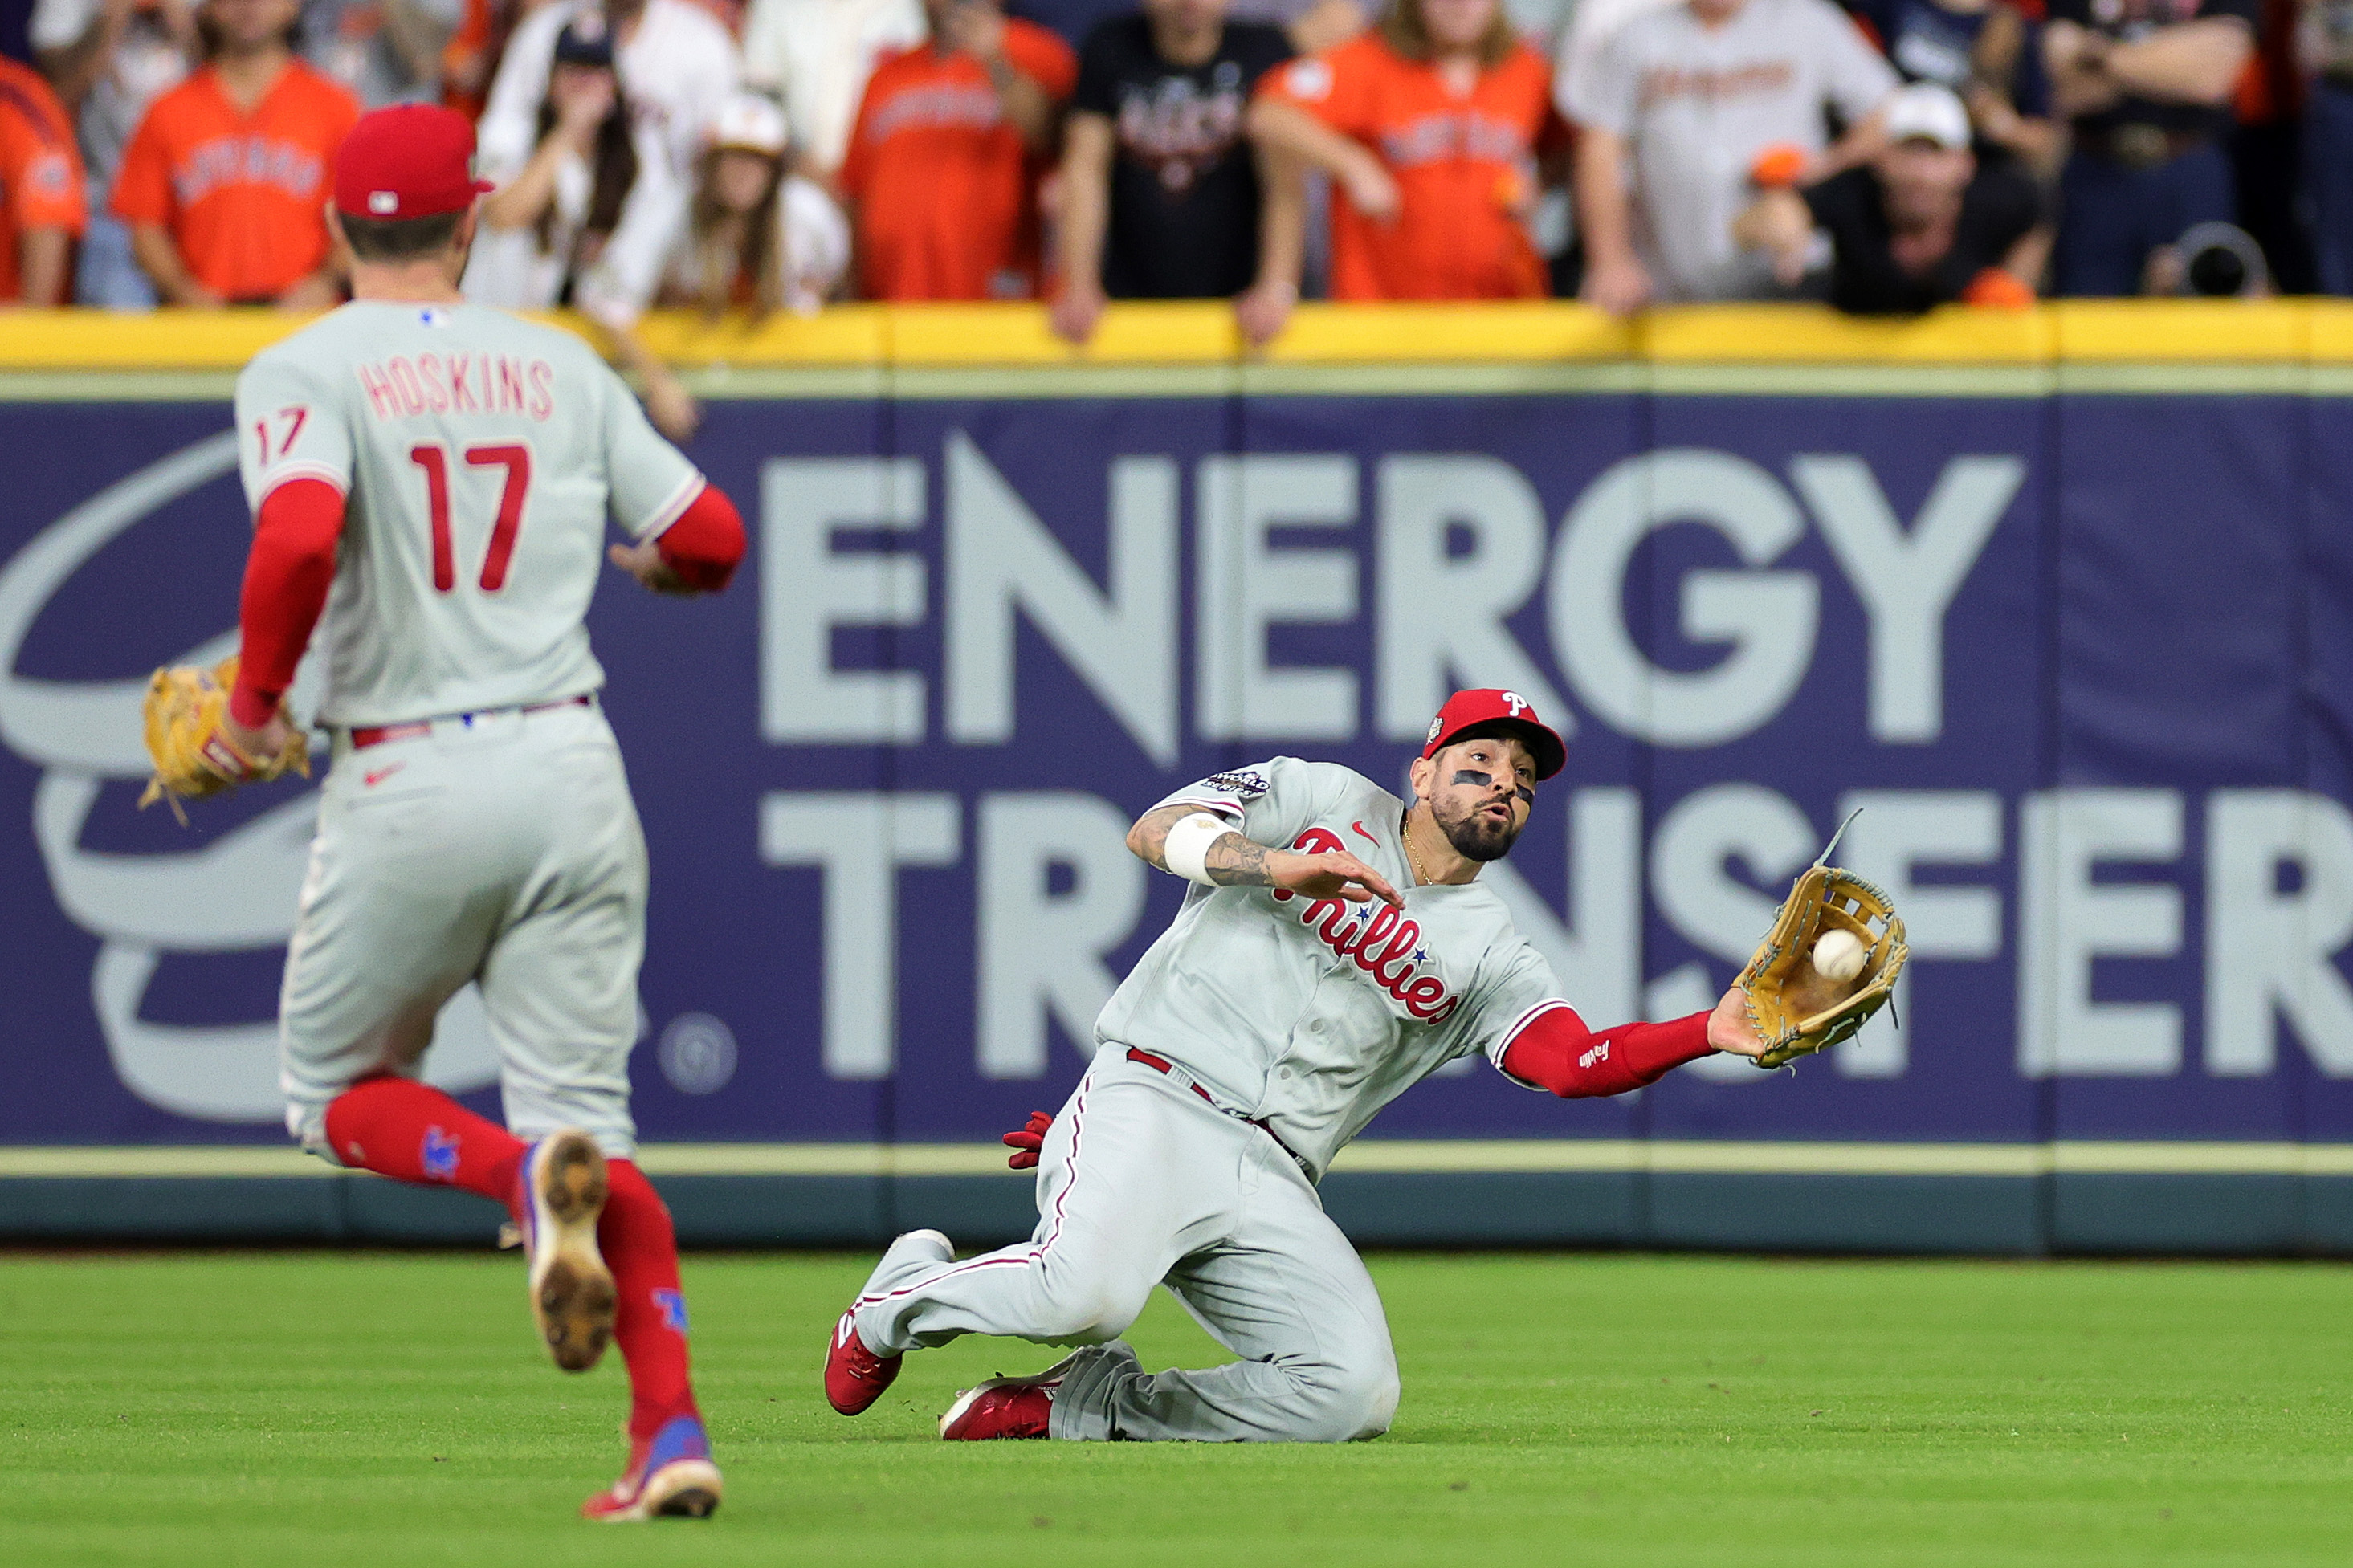 Nick Castellanos (R) of the Philadelphoia Phillies catches the ball in he right field during the ninth inning in Game 1 of the MLB World Series against the Houston Astros at Minute Maid Park in Houston, Texas, October 28, 2022. /CFP